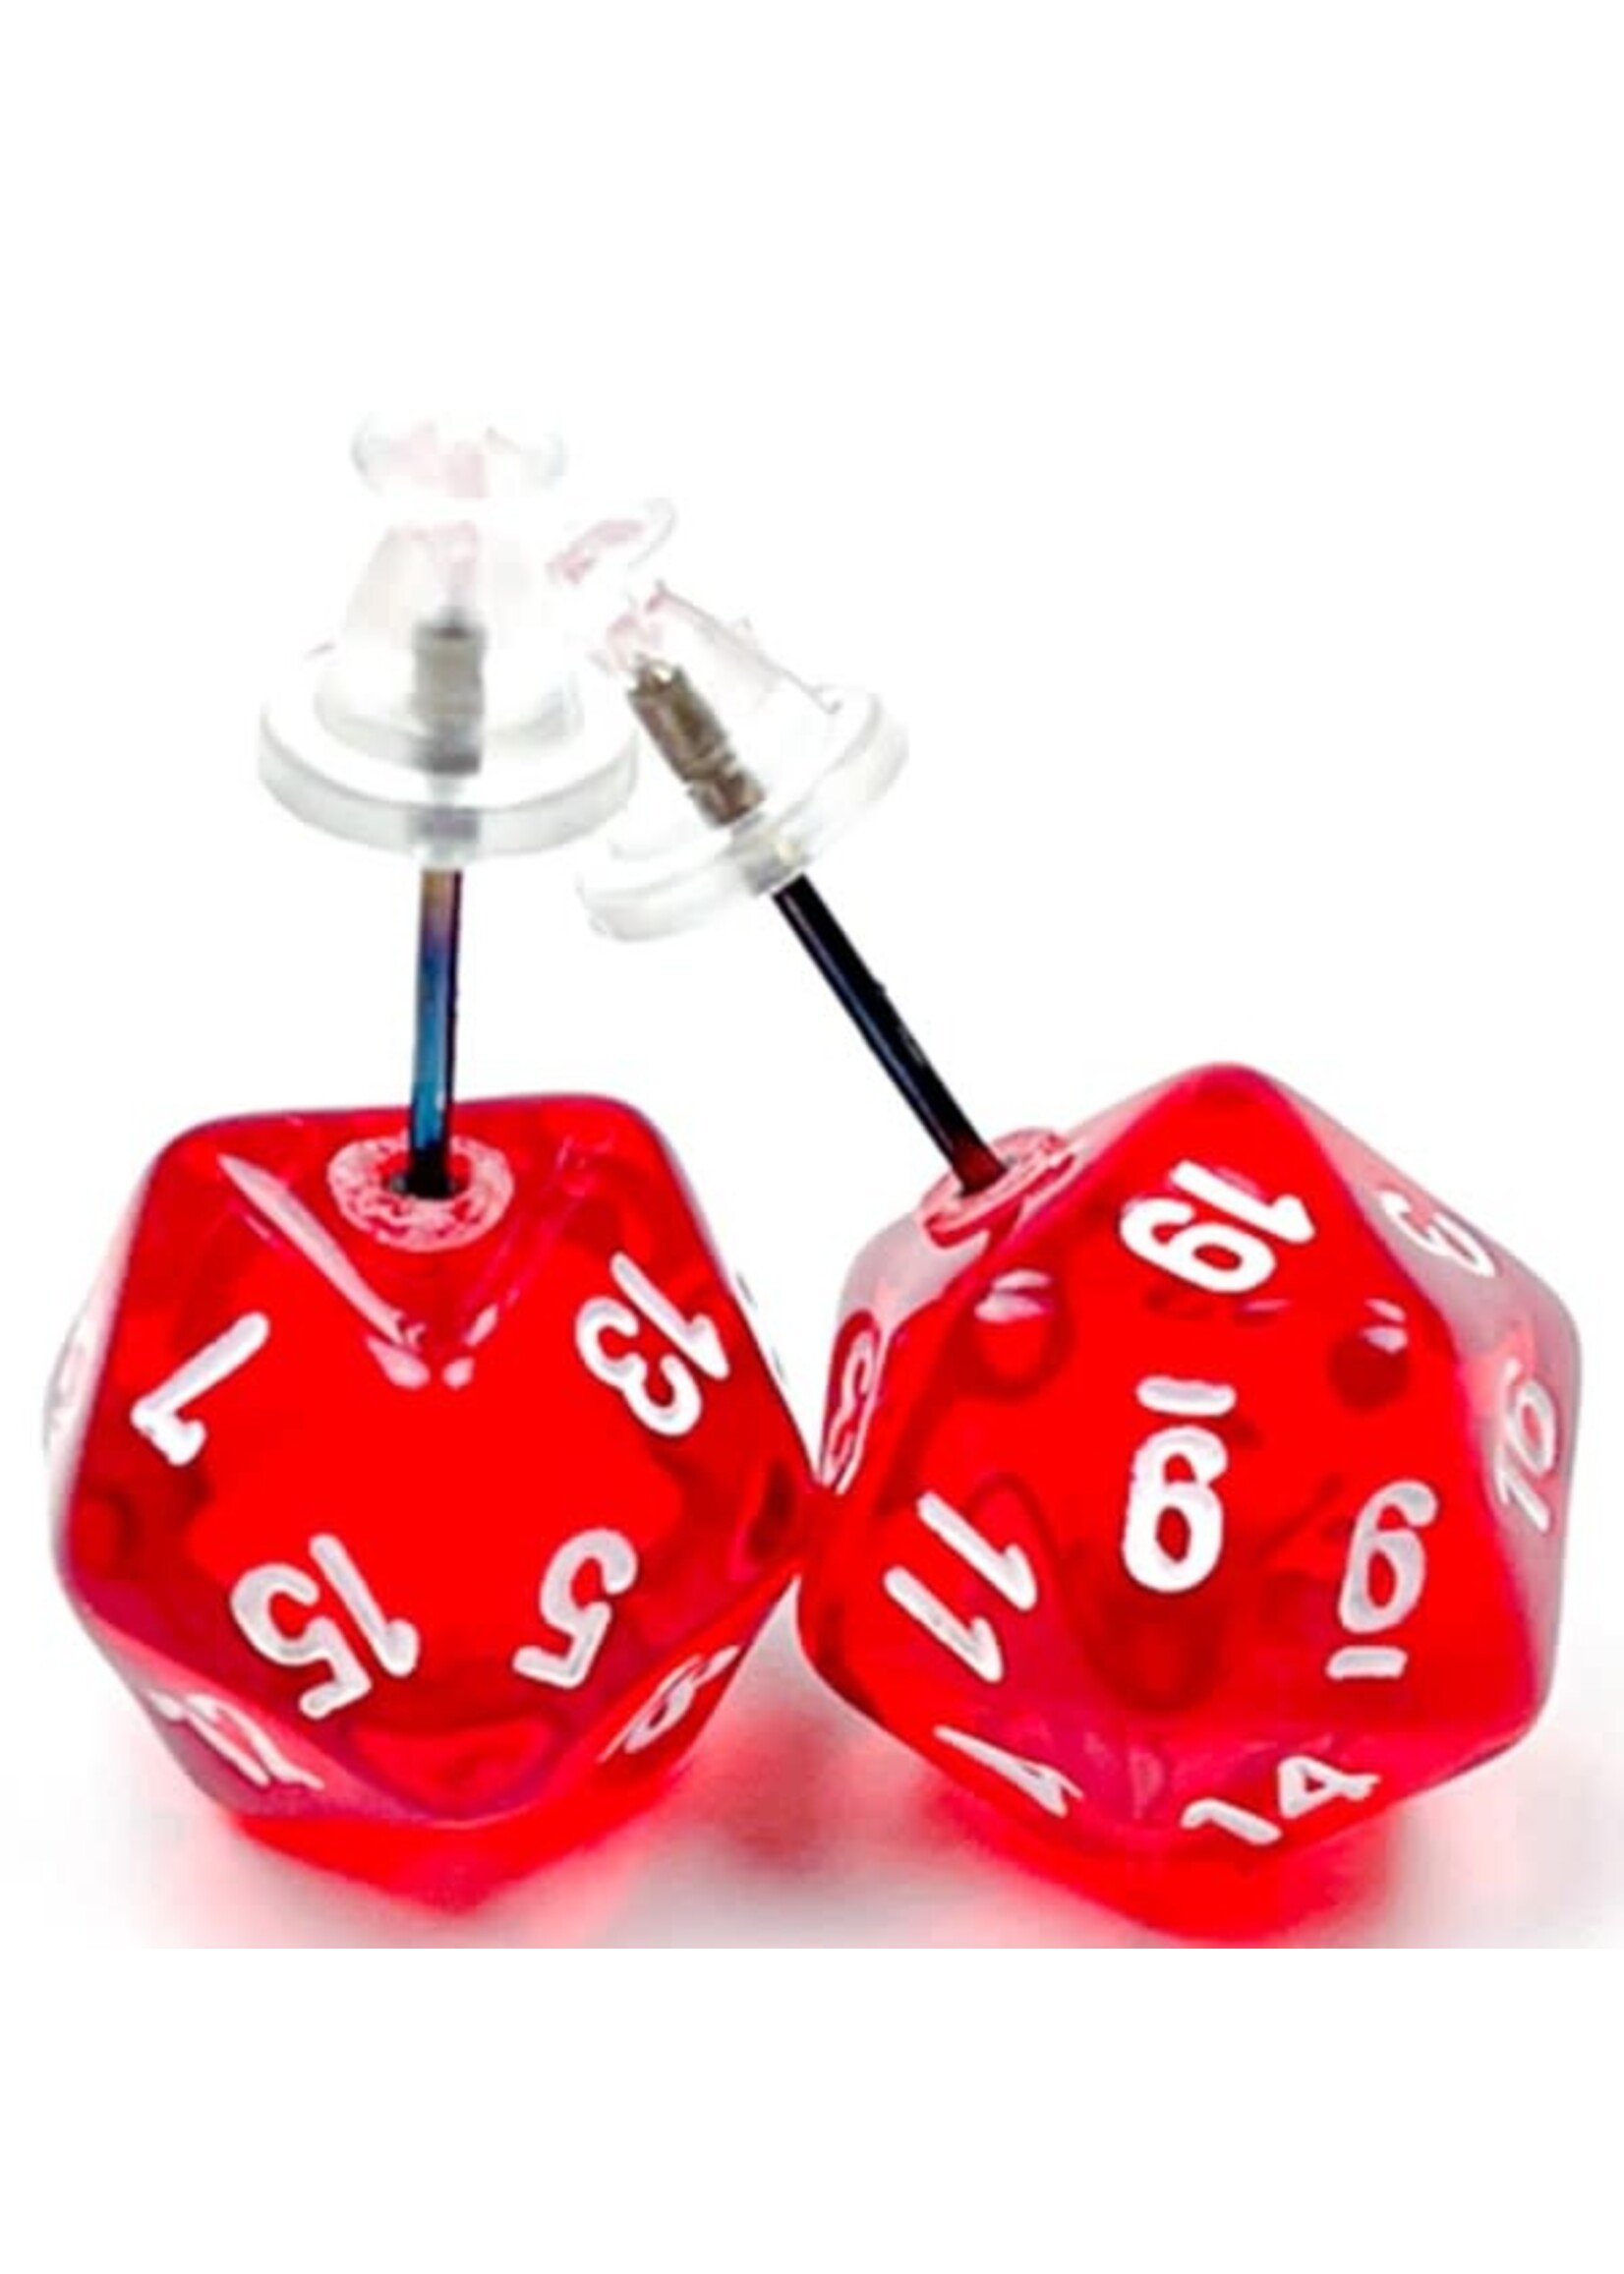 Chessex Stud Earrings Mini d20 - Translucent Red